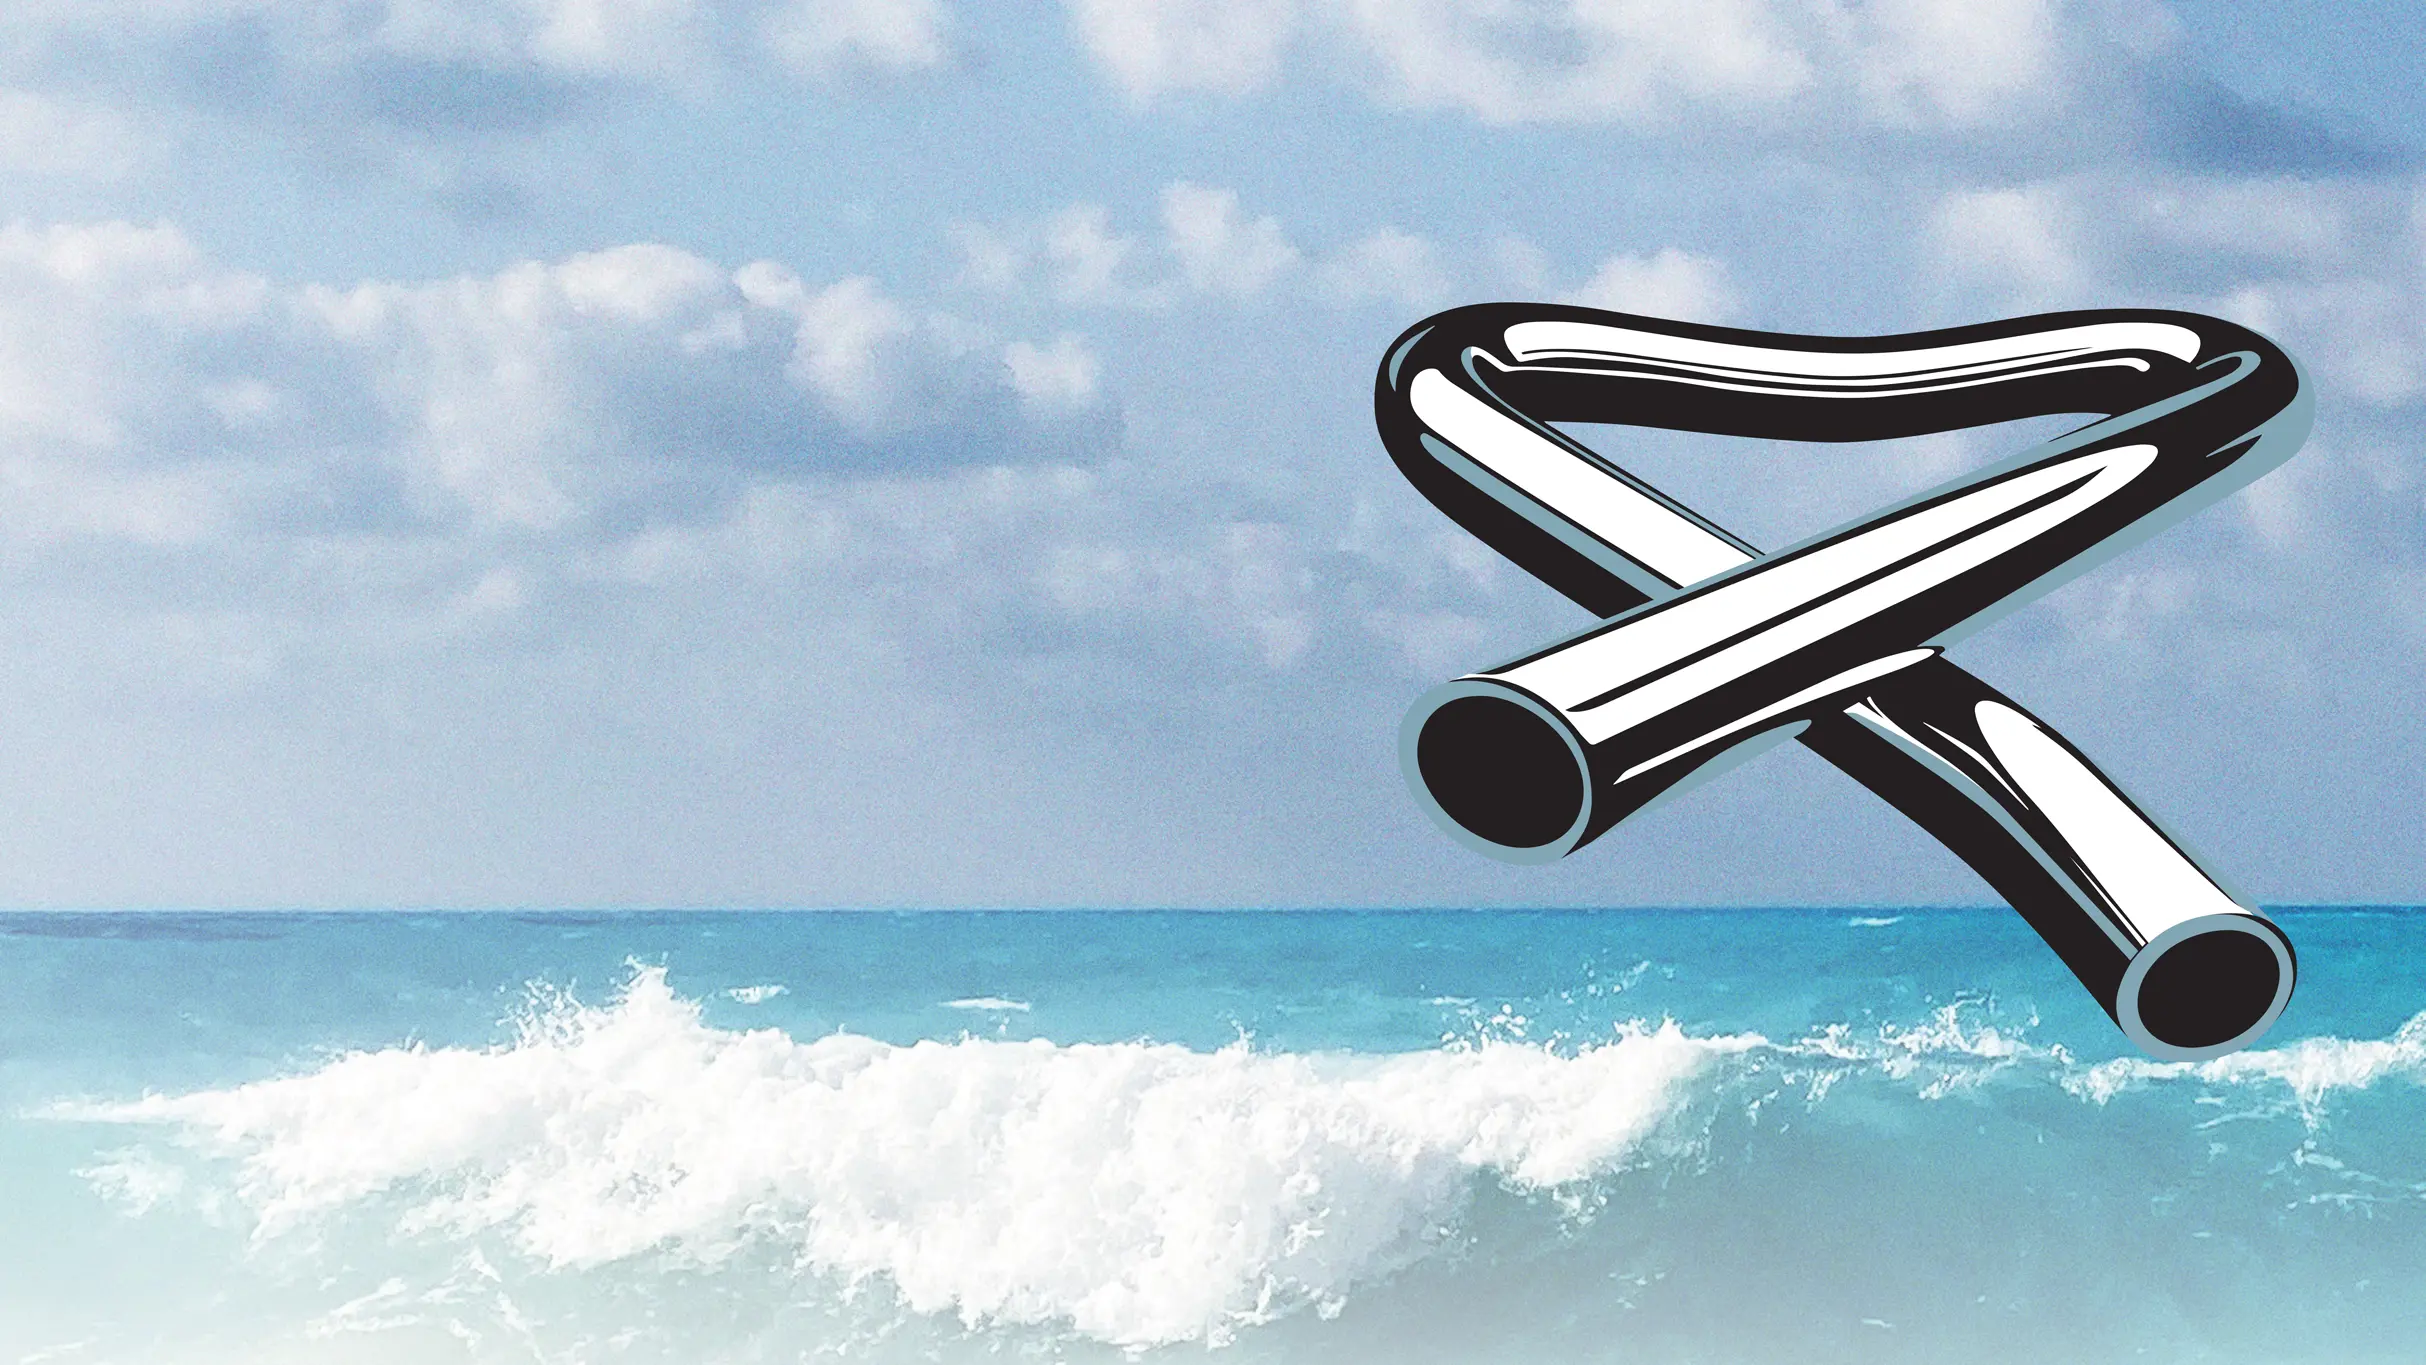 Mike Oldfield's Tubular Bells In Concert - Gold Anniversary